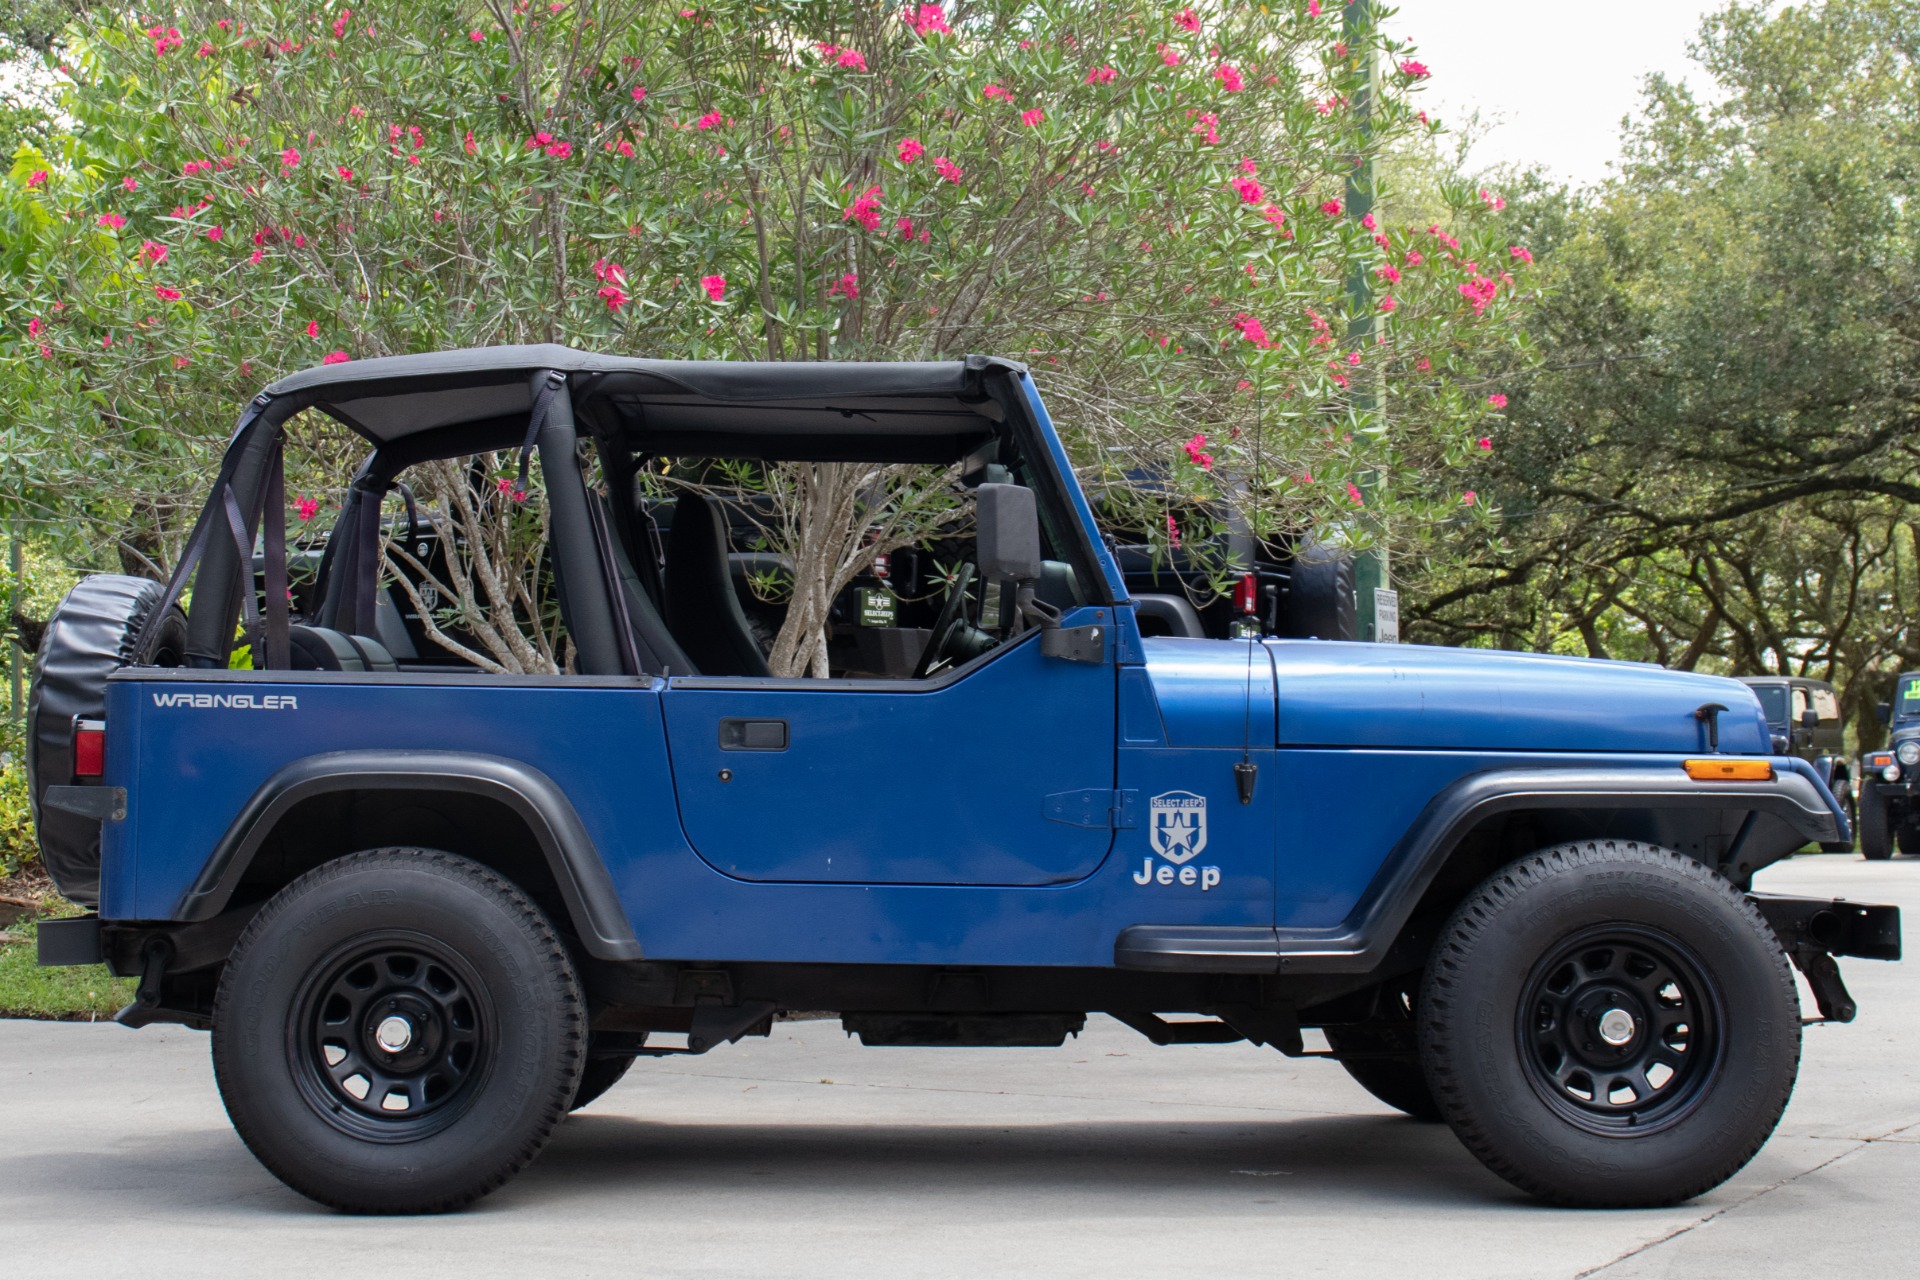 Used 1994 Jeep Wrangler S For Sale ($6,995) | Select Jeeps Inc. Stock  #423078